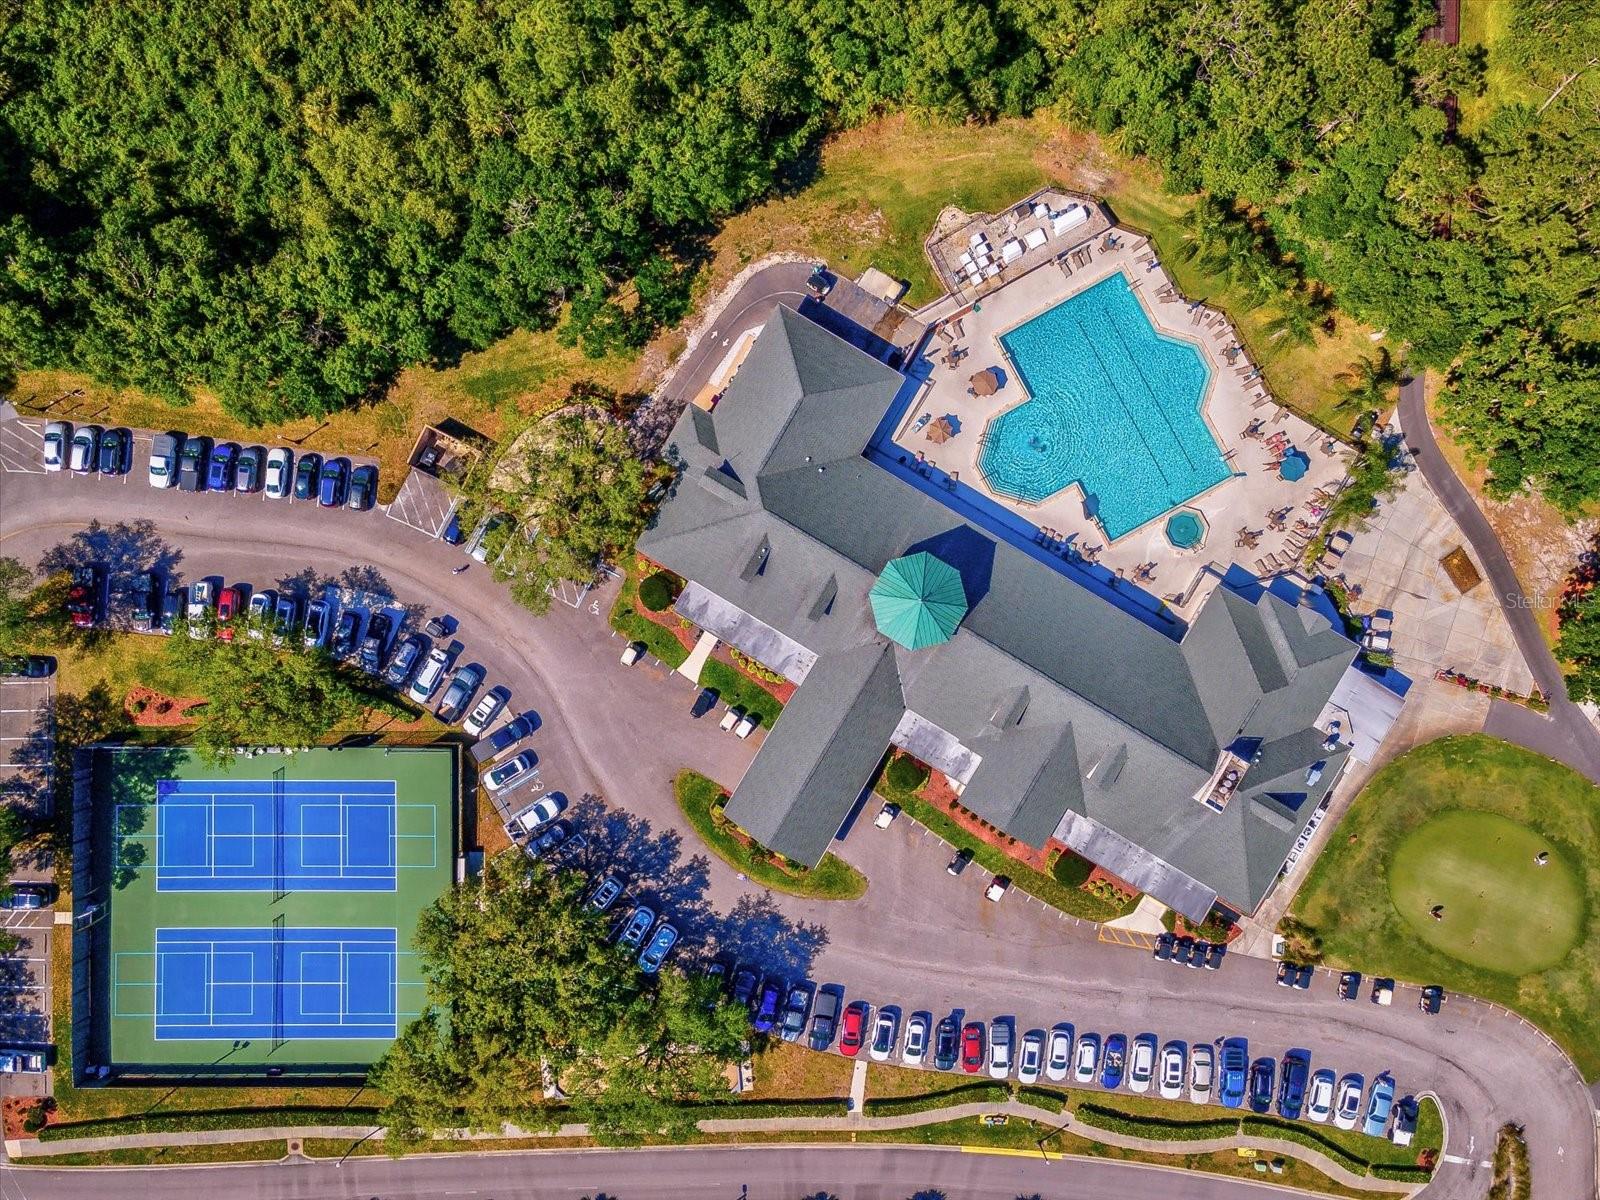 Drone views of clubhouse, heated pool, spa, tennis/pickle ball courts